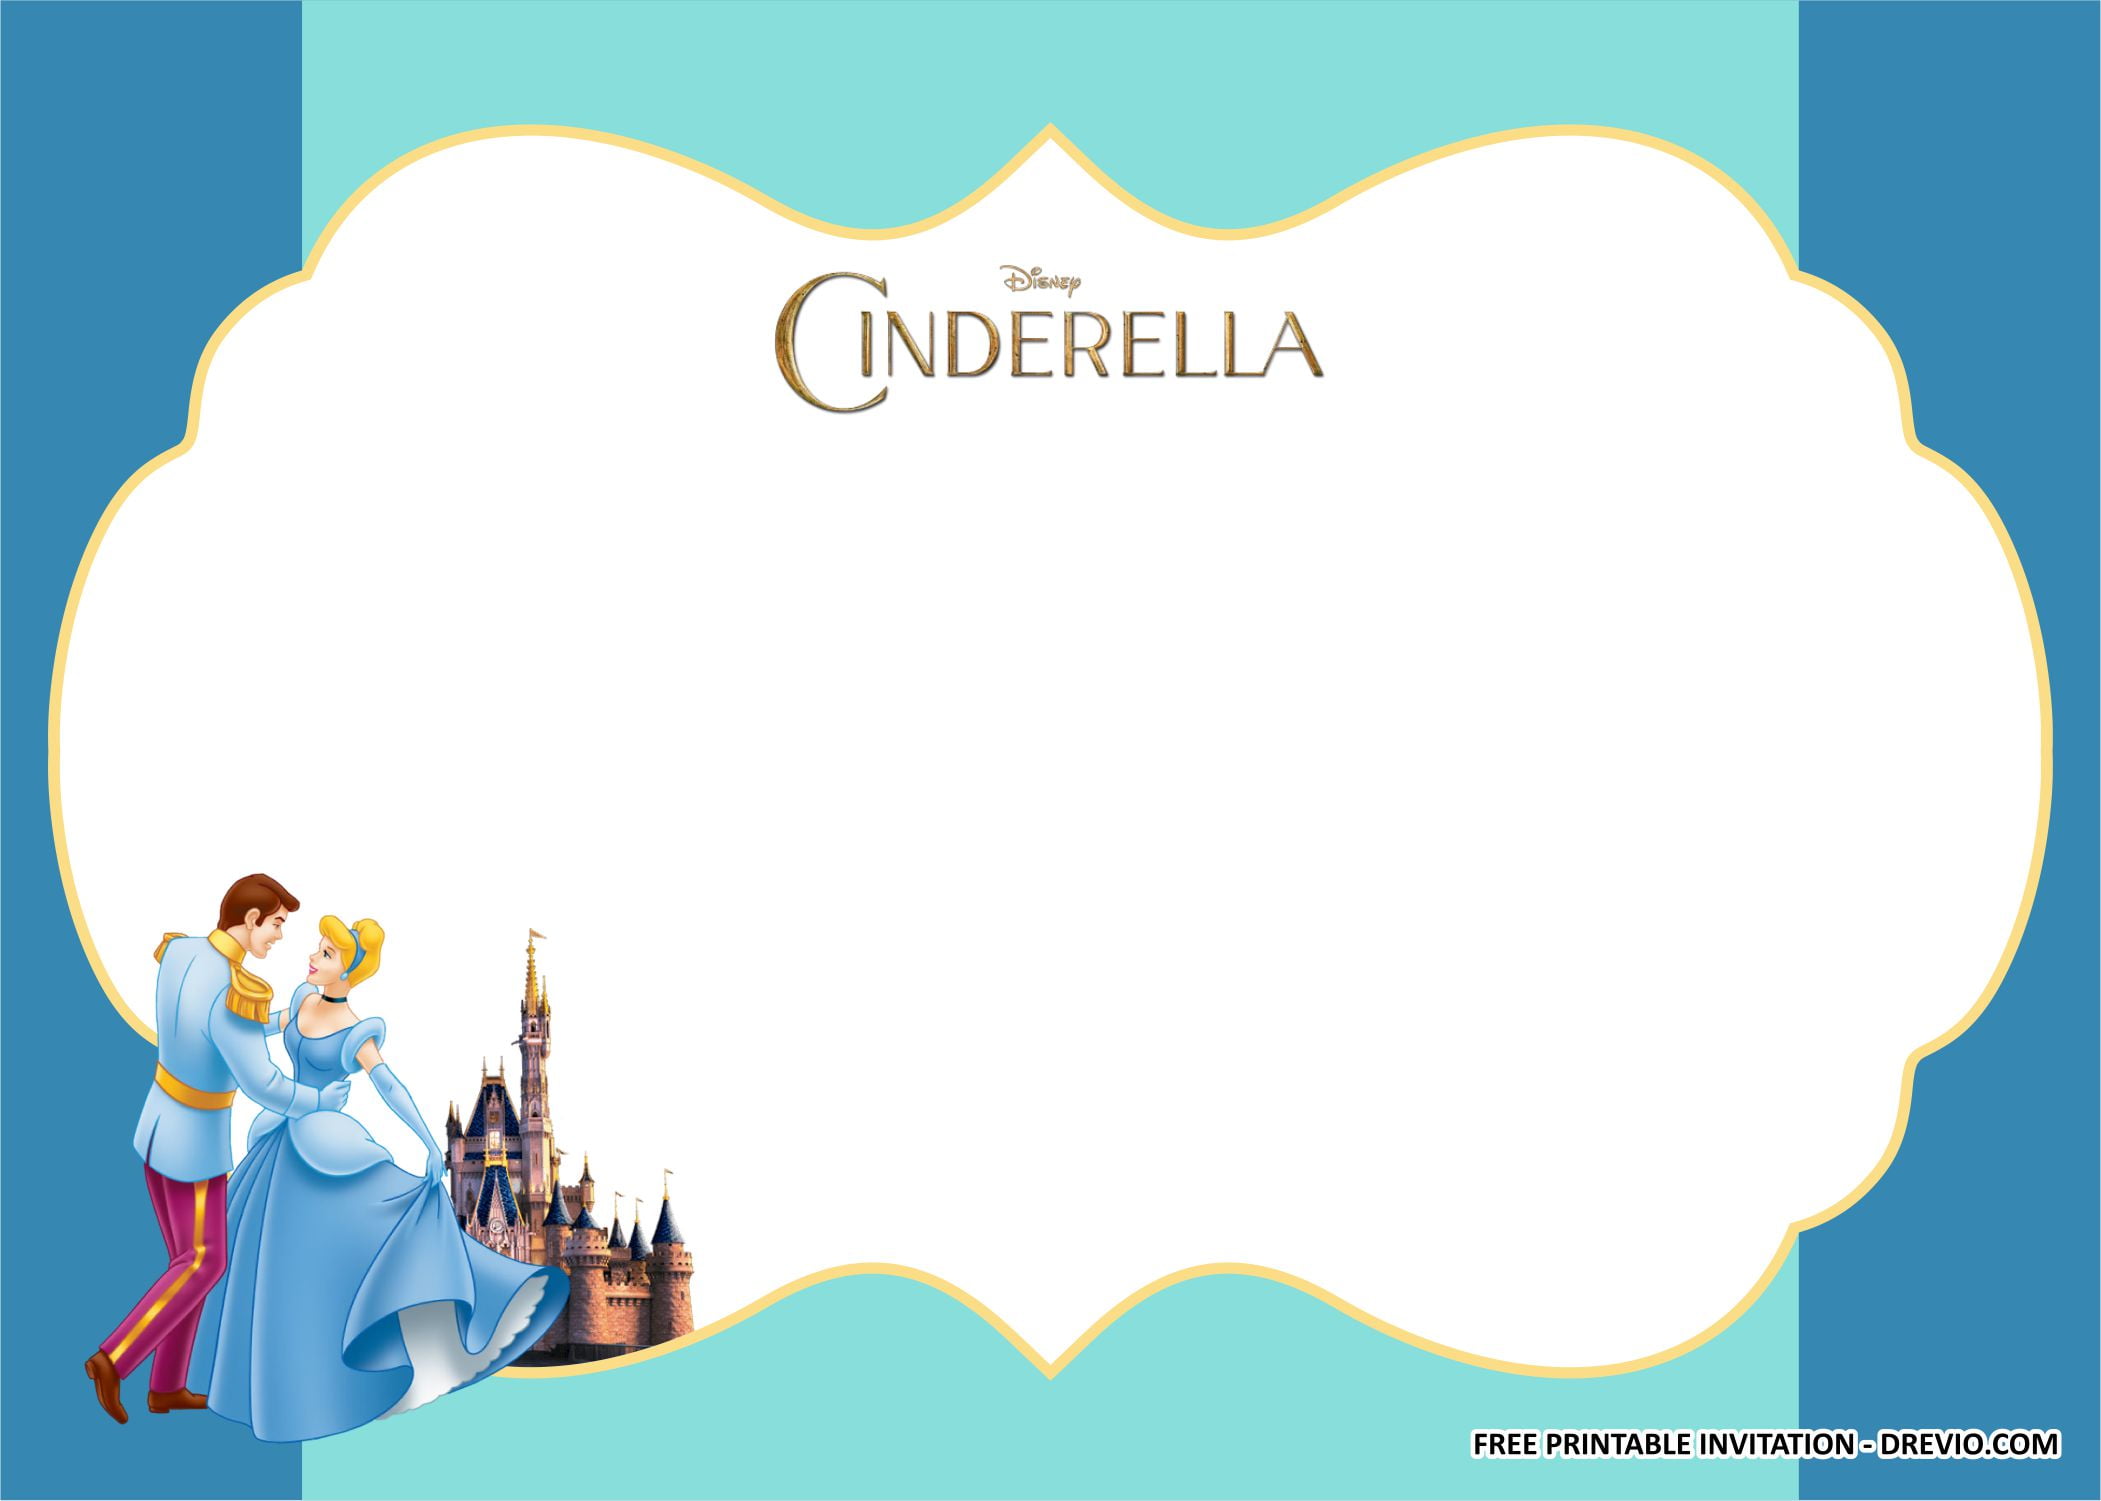 MARHABA TRADERS Cinderella cake toy topper for cake decoration - Cinderella  cake toy topper for cake decoration . Buy Cinderella toys in India. shop  for MARHABA TRADERS products in India. | Flipkart.com